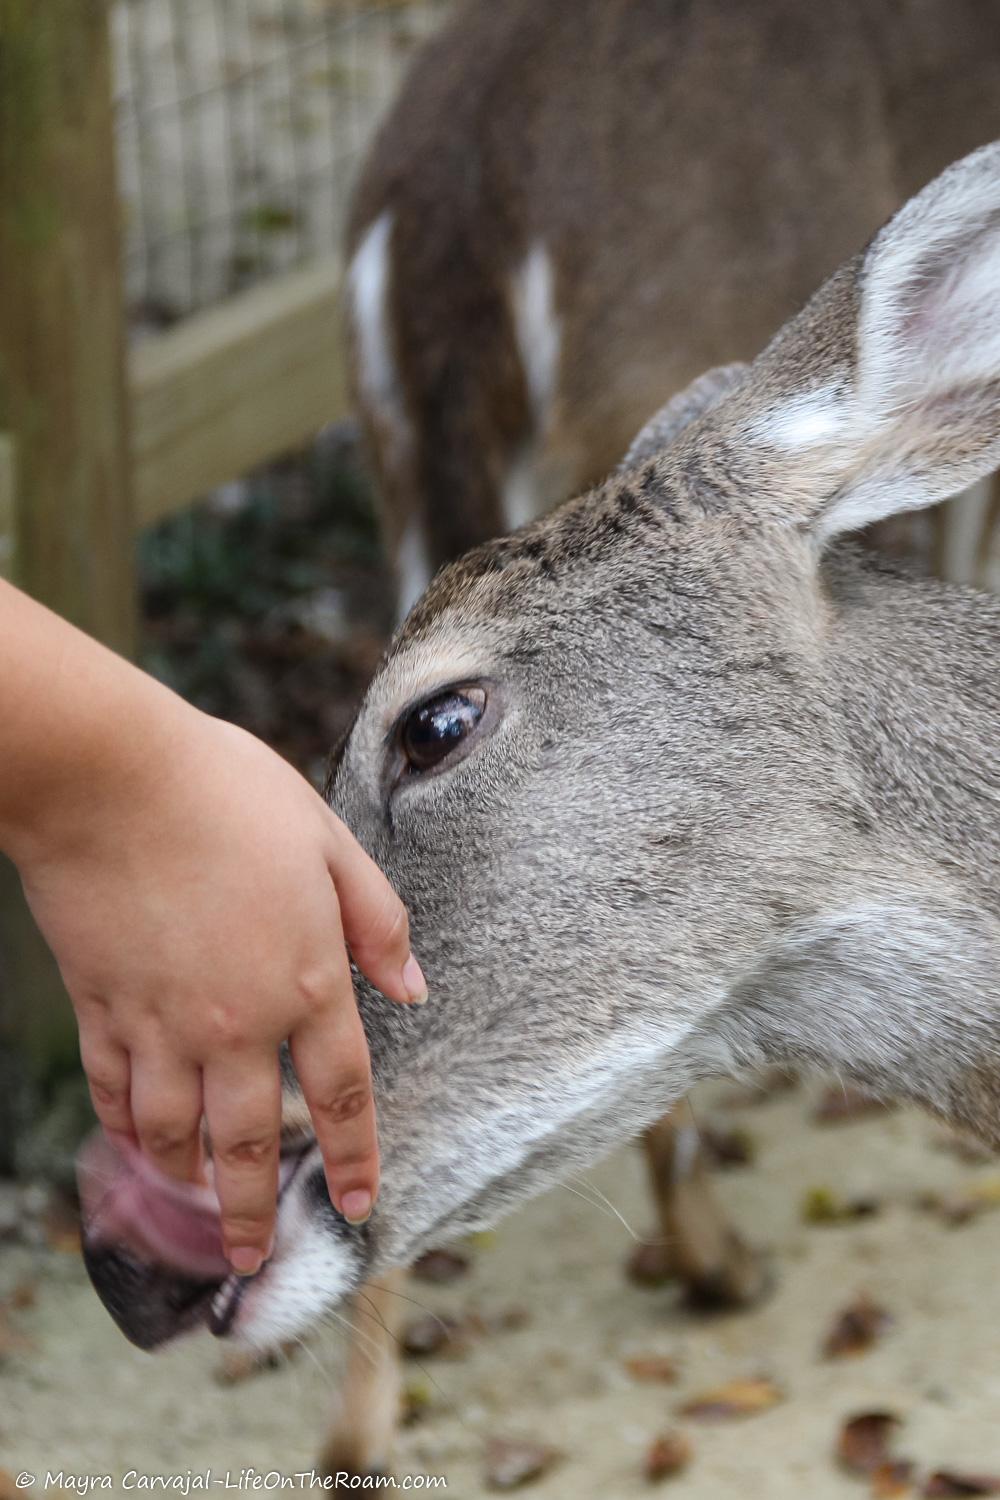 A deer licking someone's hand